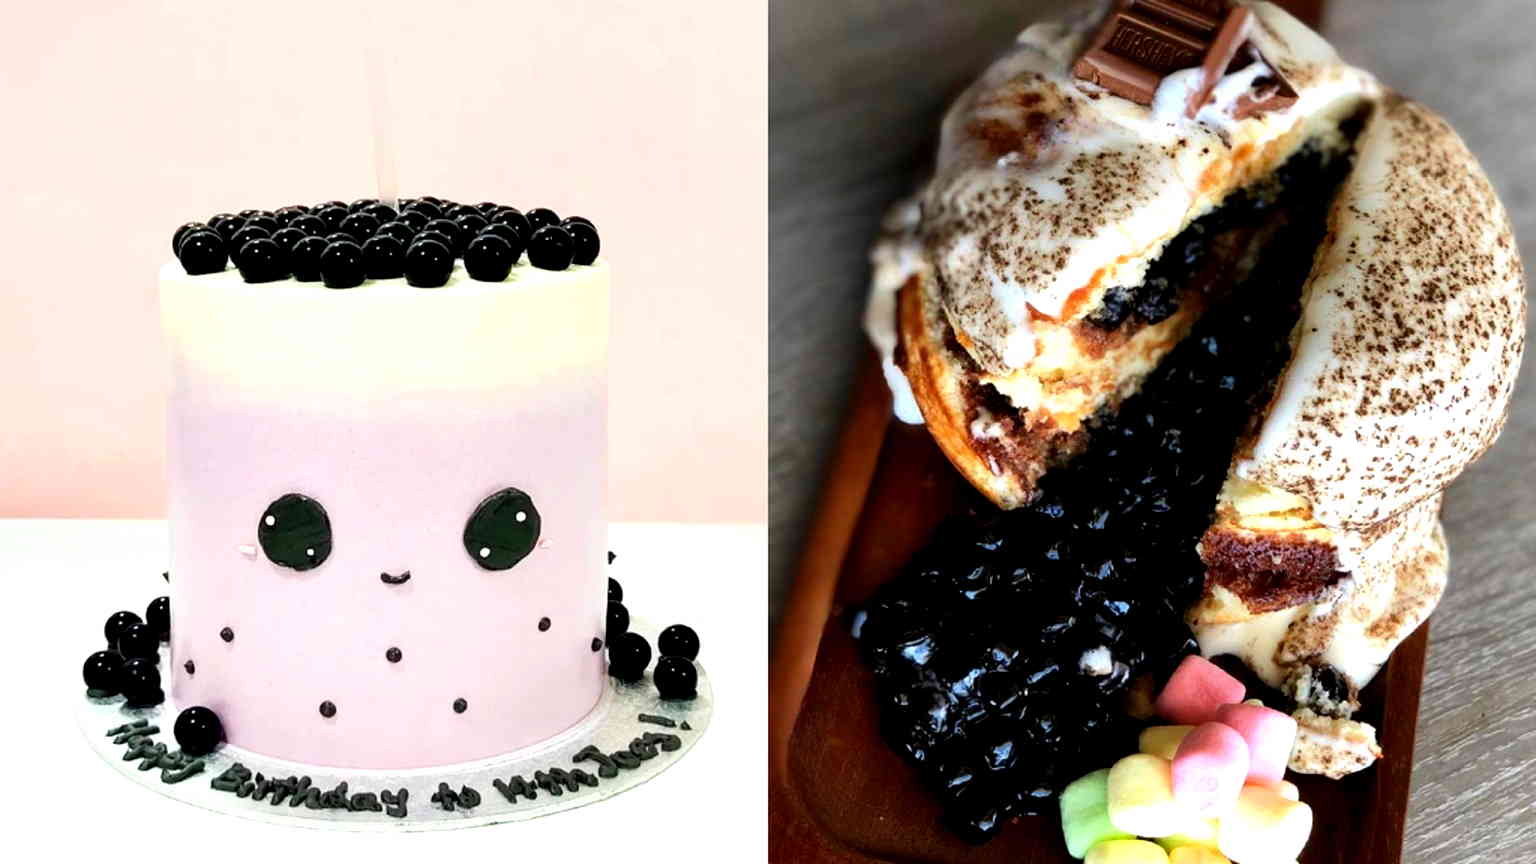 Boba cakes: Now you can have your boba and eat it too